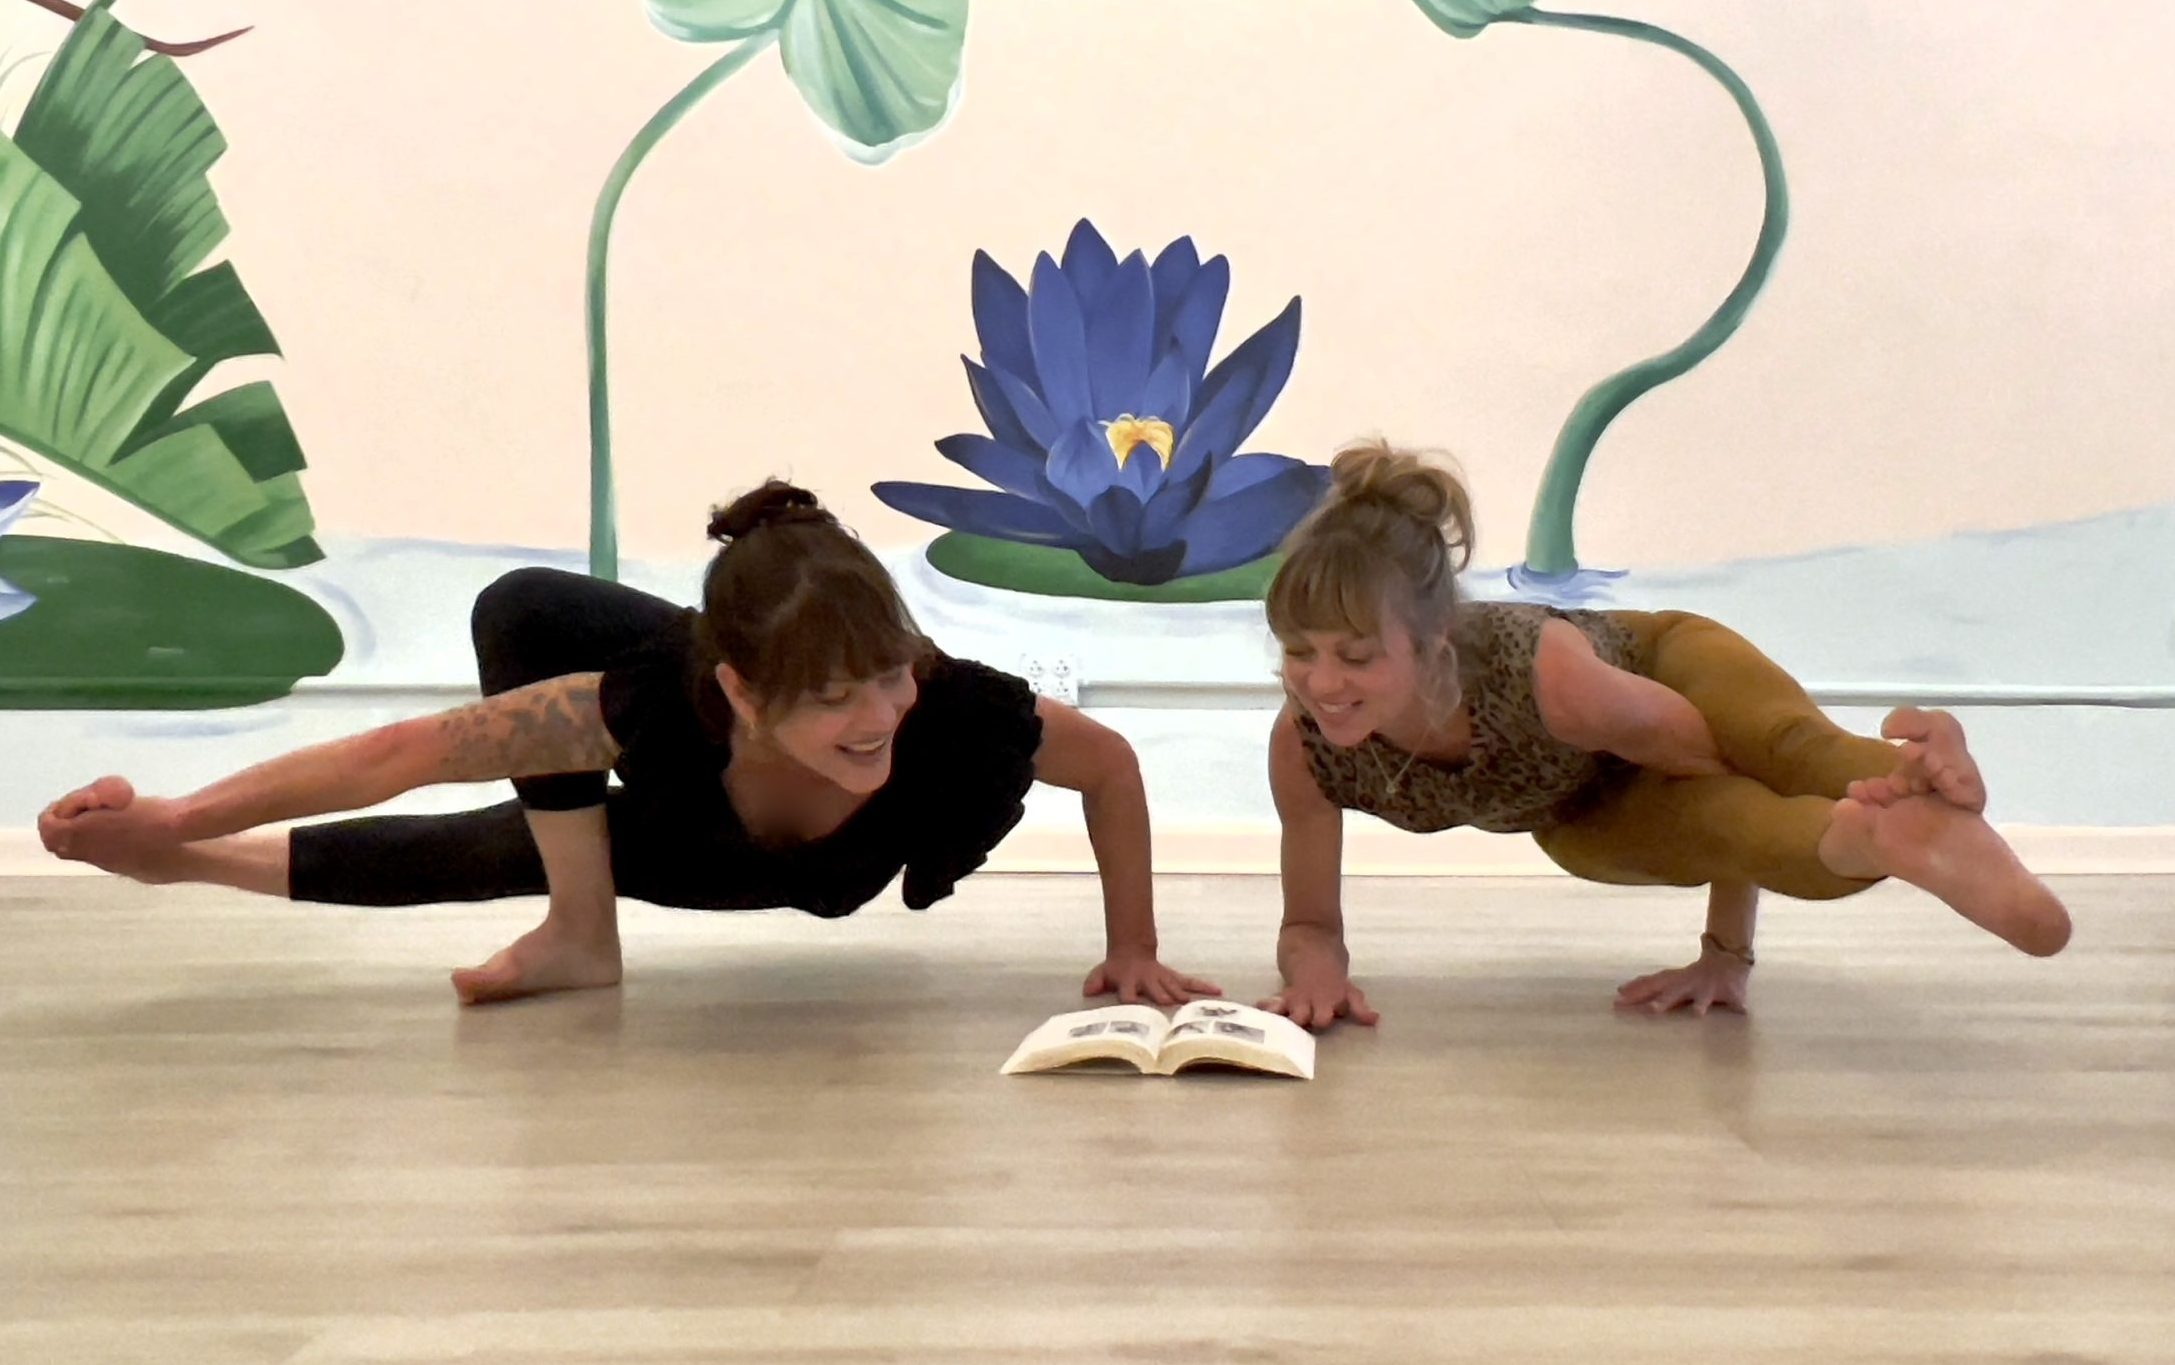 Jasmine and Kate in an arm balance pose looking at a book.